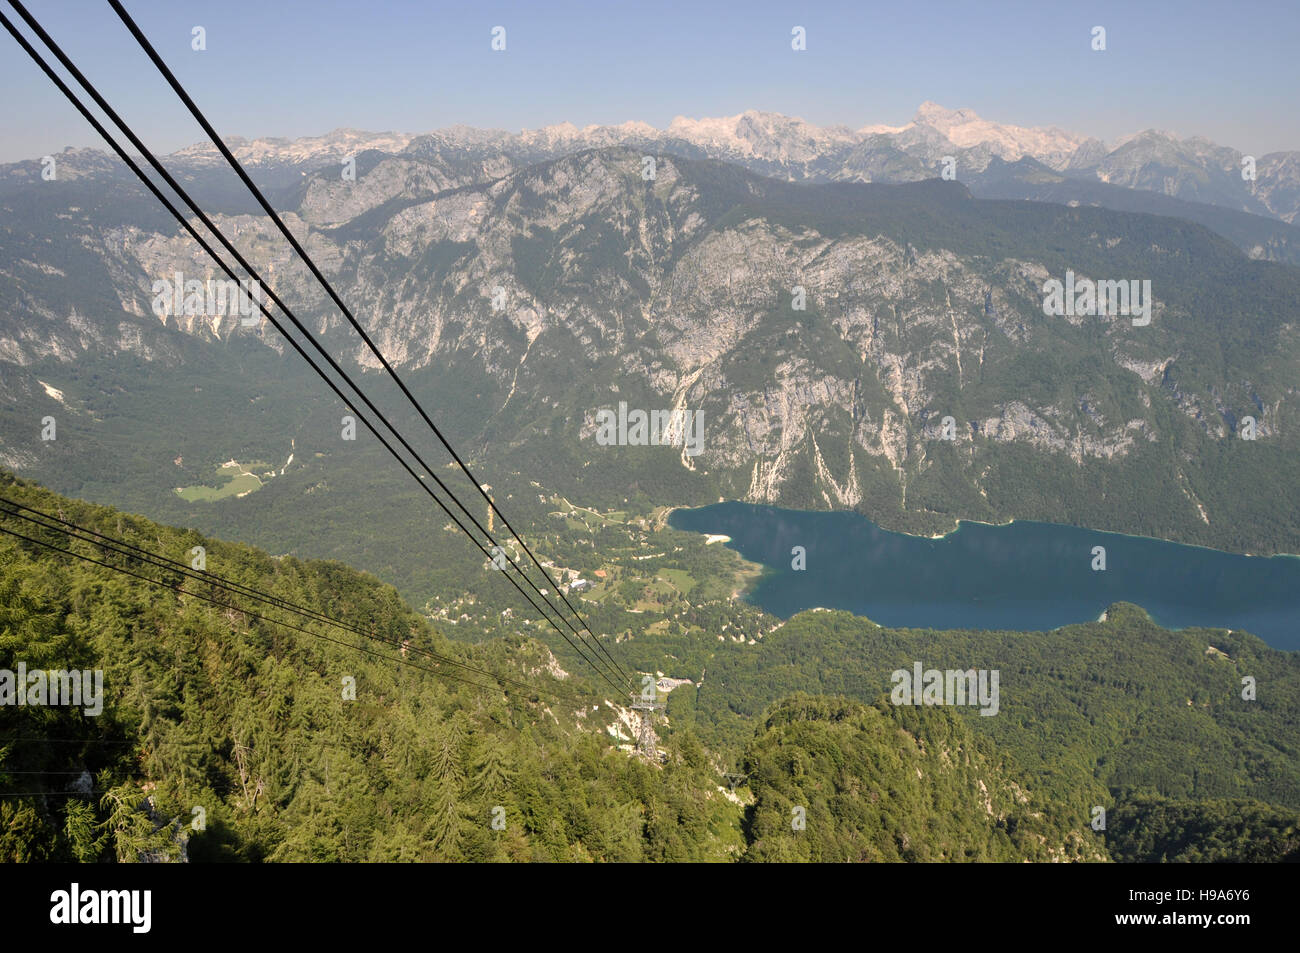 Looking down the alpine cable car to the village of Ukanc on the shore of Lake Bohinj, Slovenia, from Mount Vogel Stock Photo